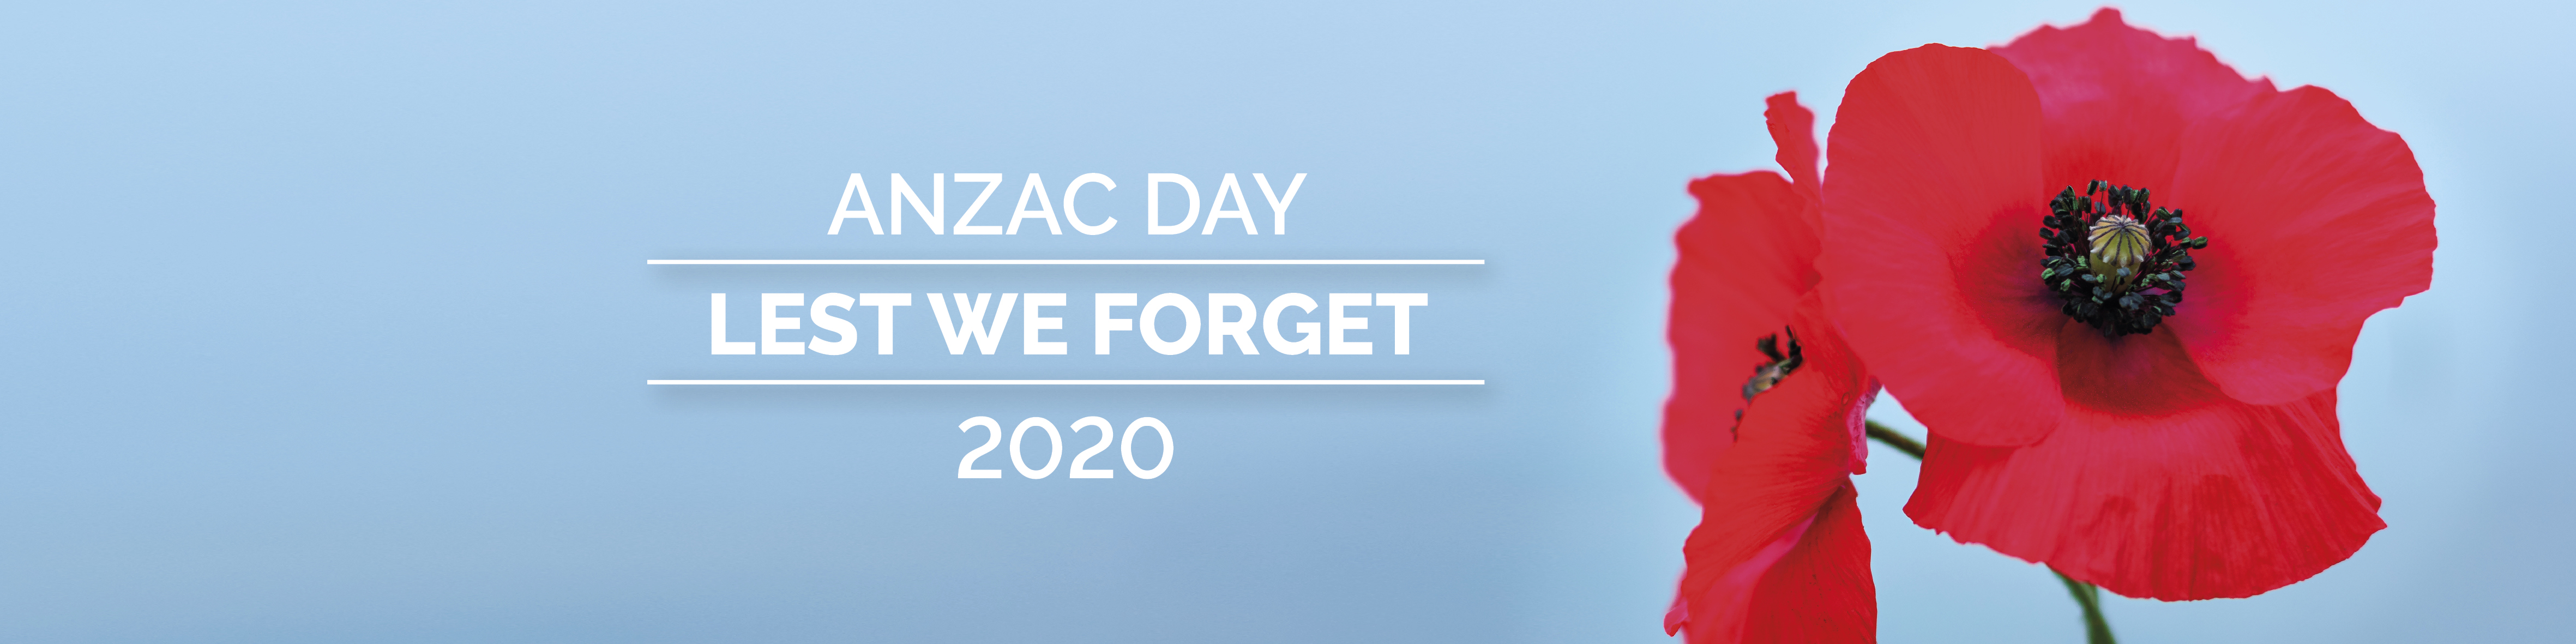 anzac day 2020 student video